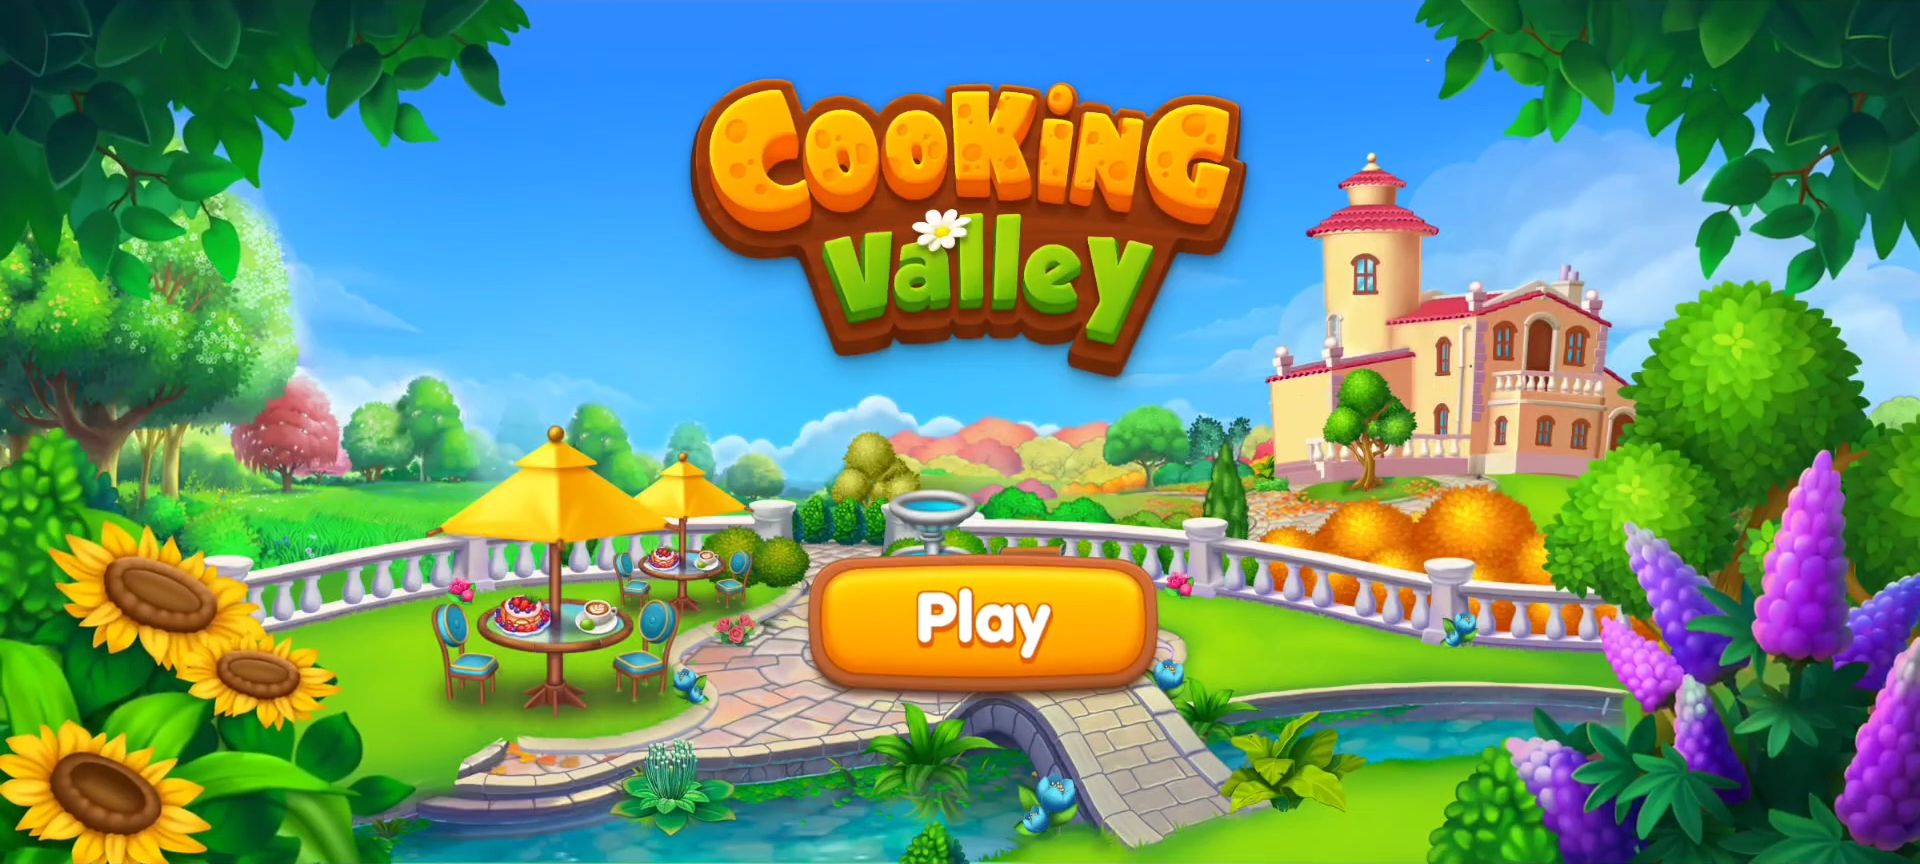 Download Valley: Cooking Games & Design Android free game.